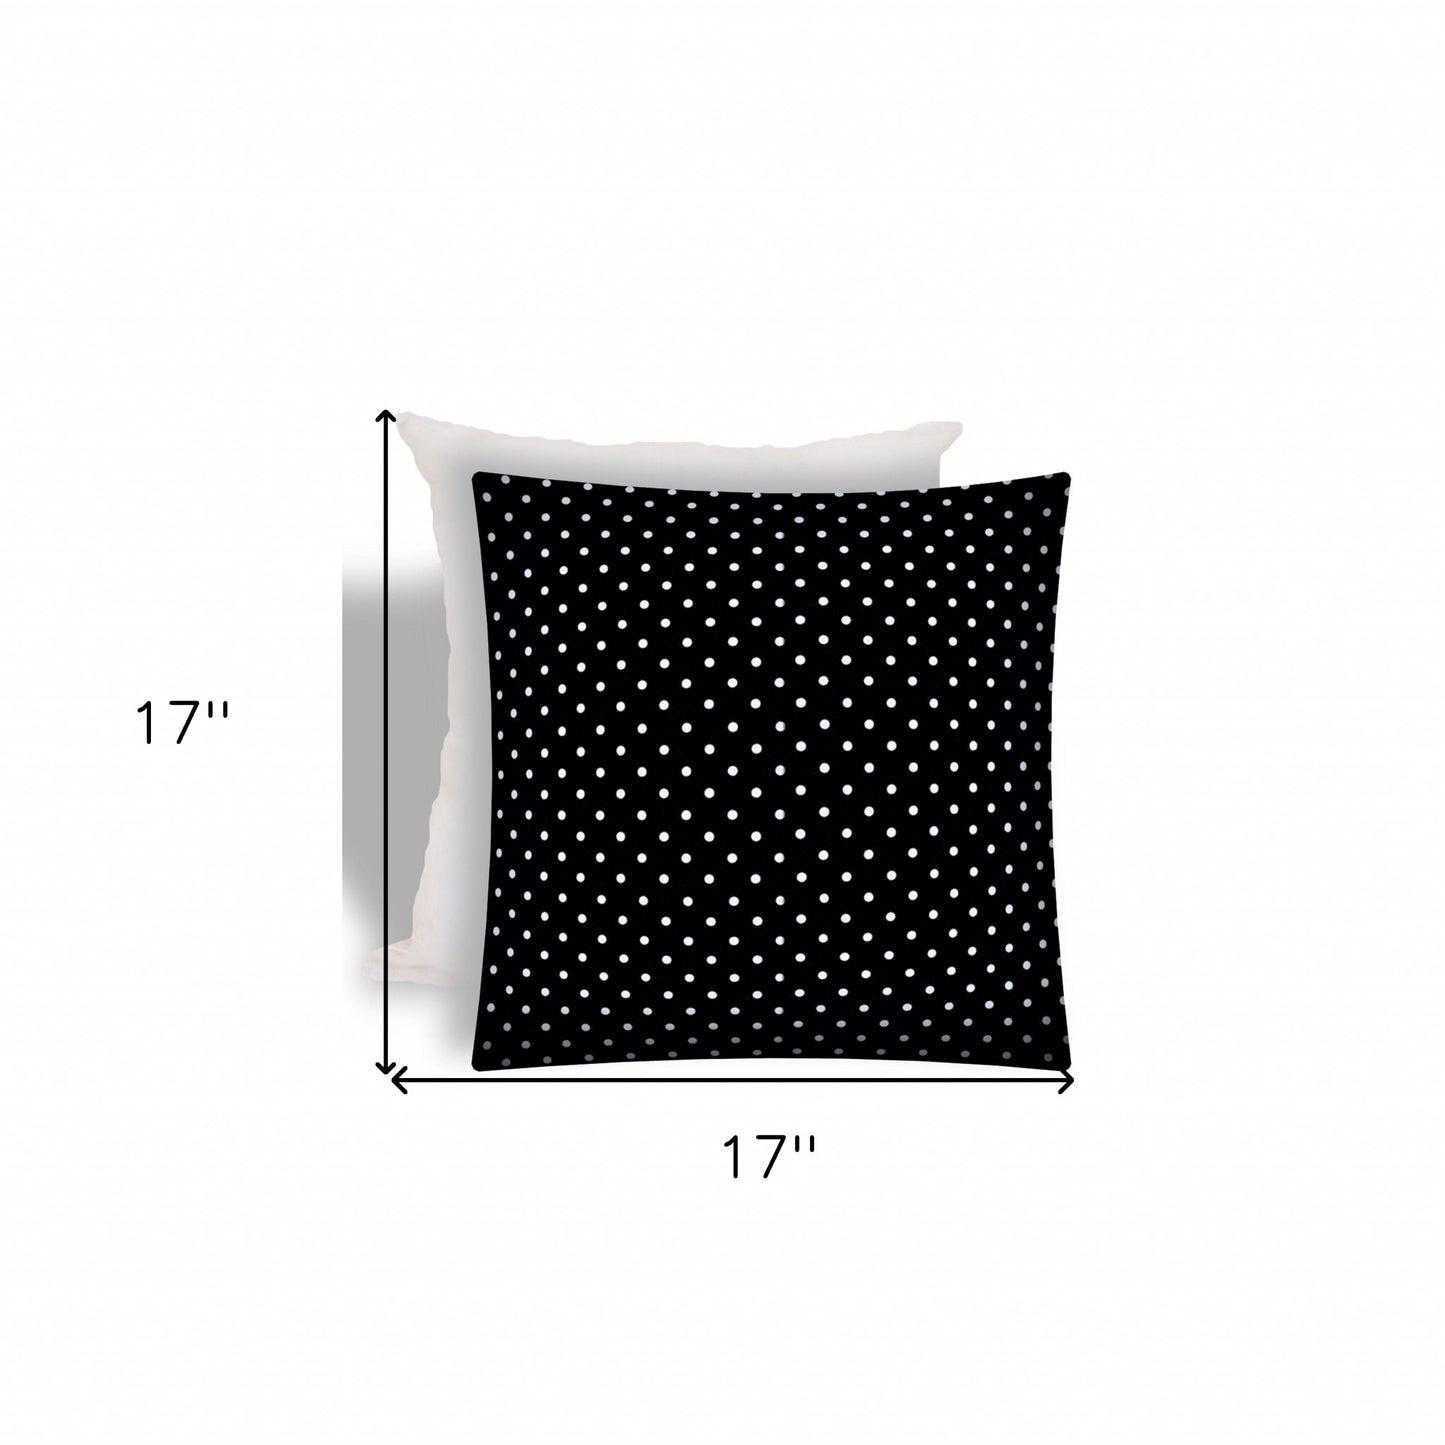 17" X 17" Black And White Zippered Polka Dots Throw Indoor Outdoor Pillow